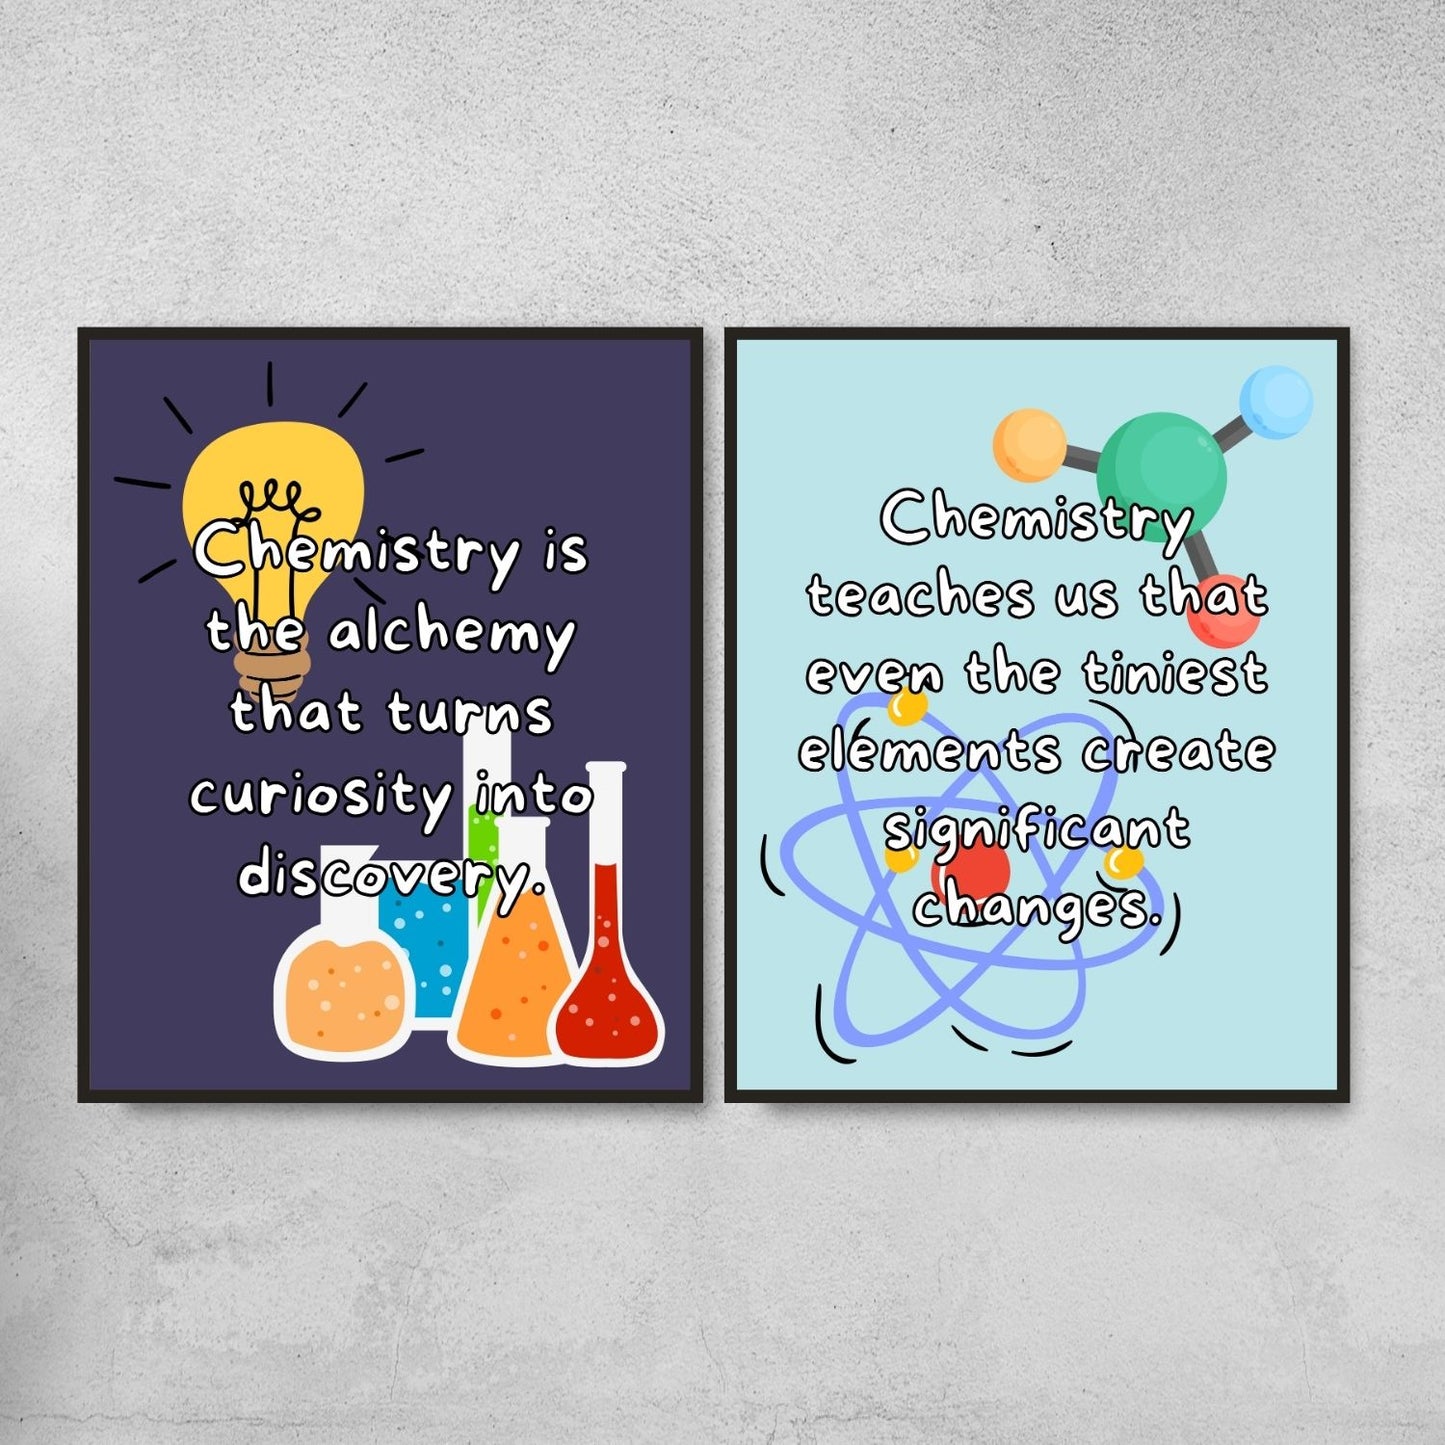 Quotes for chemistry classroom decorations - Vol.1